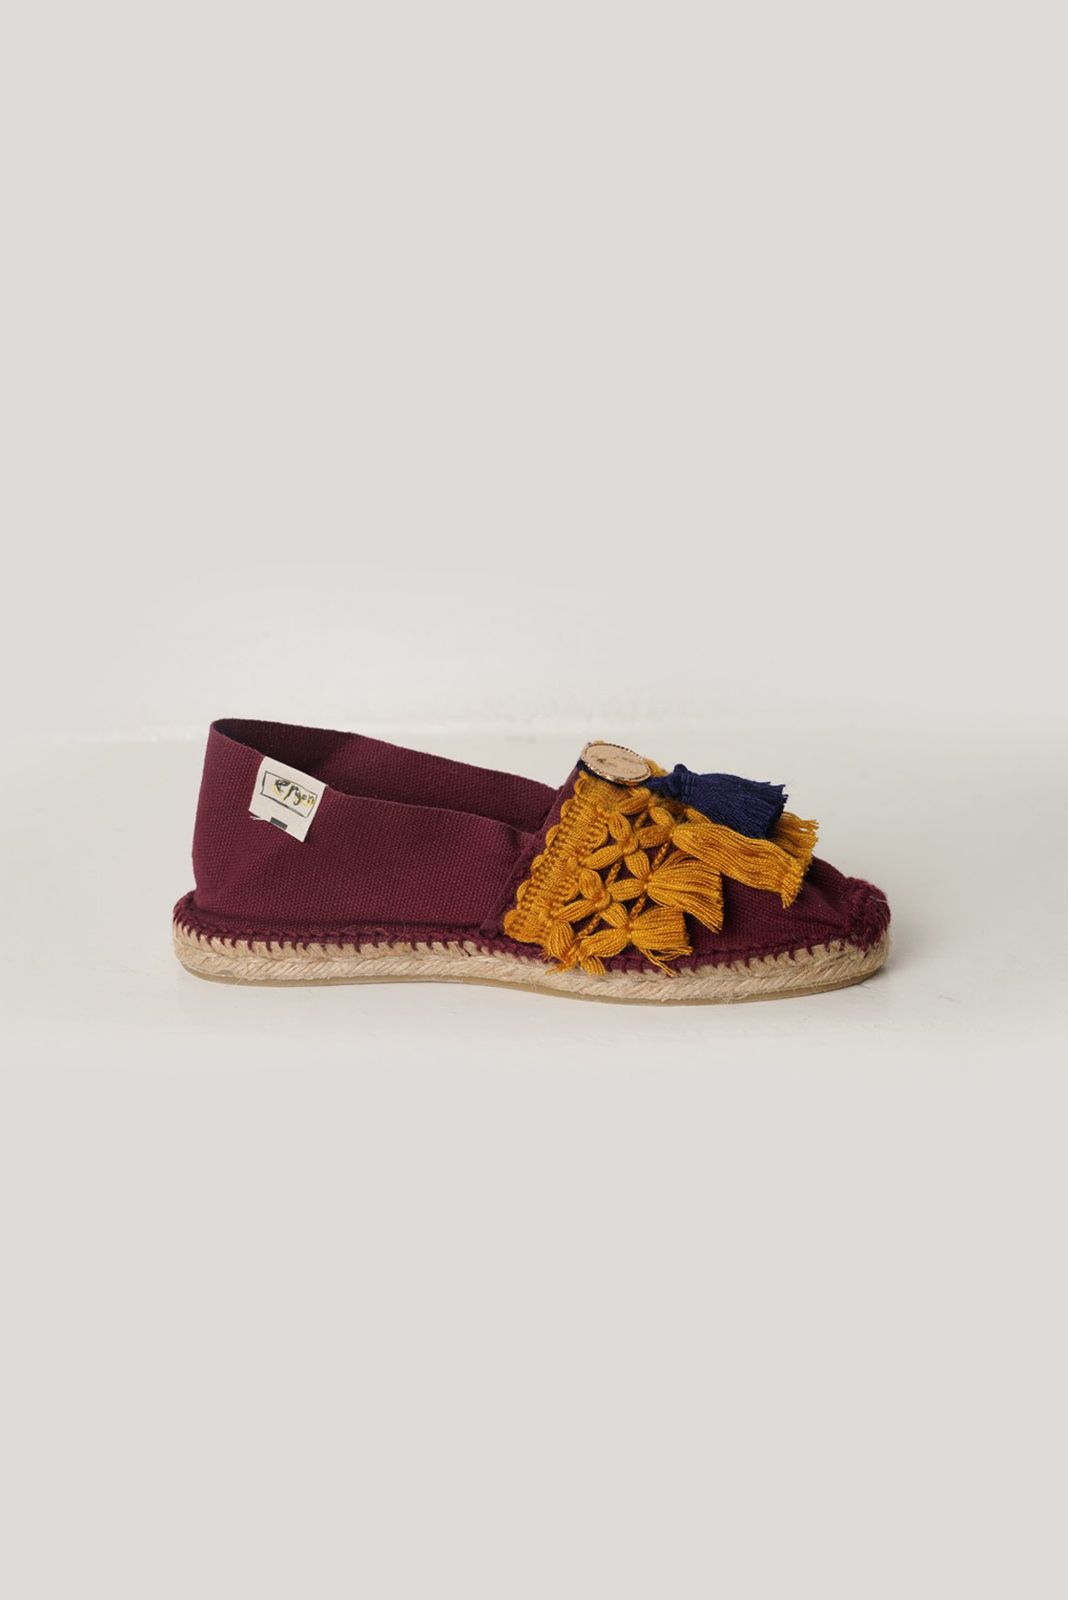 Bordeaux espadrilles with tassels and metal coins